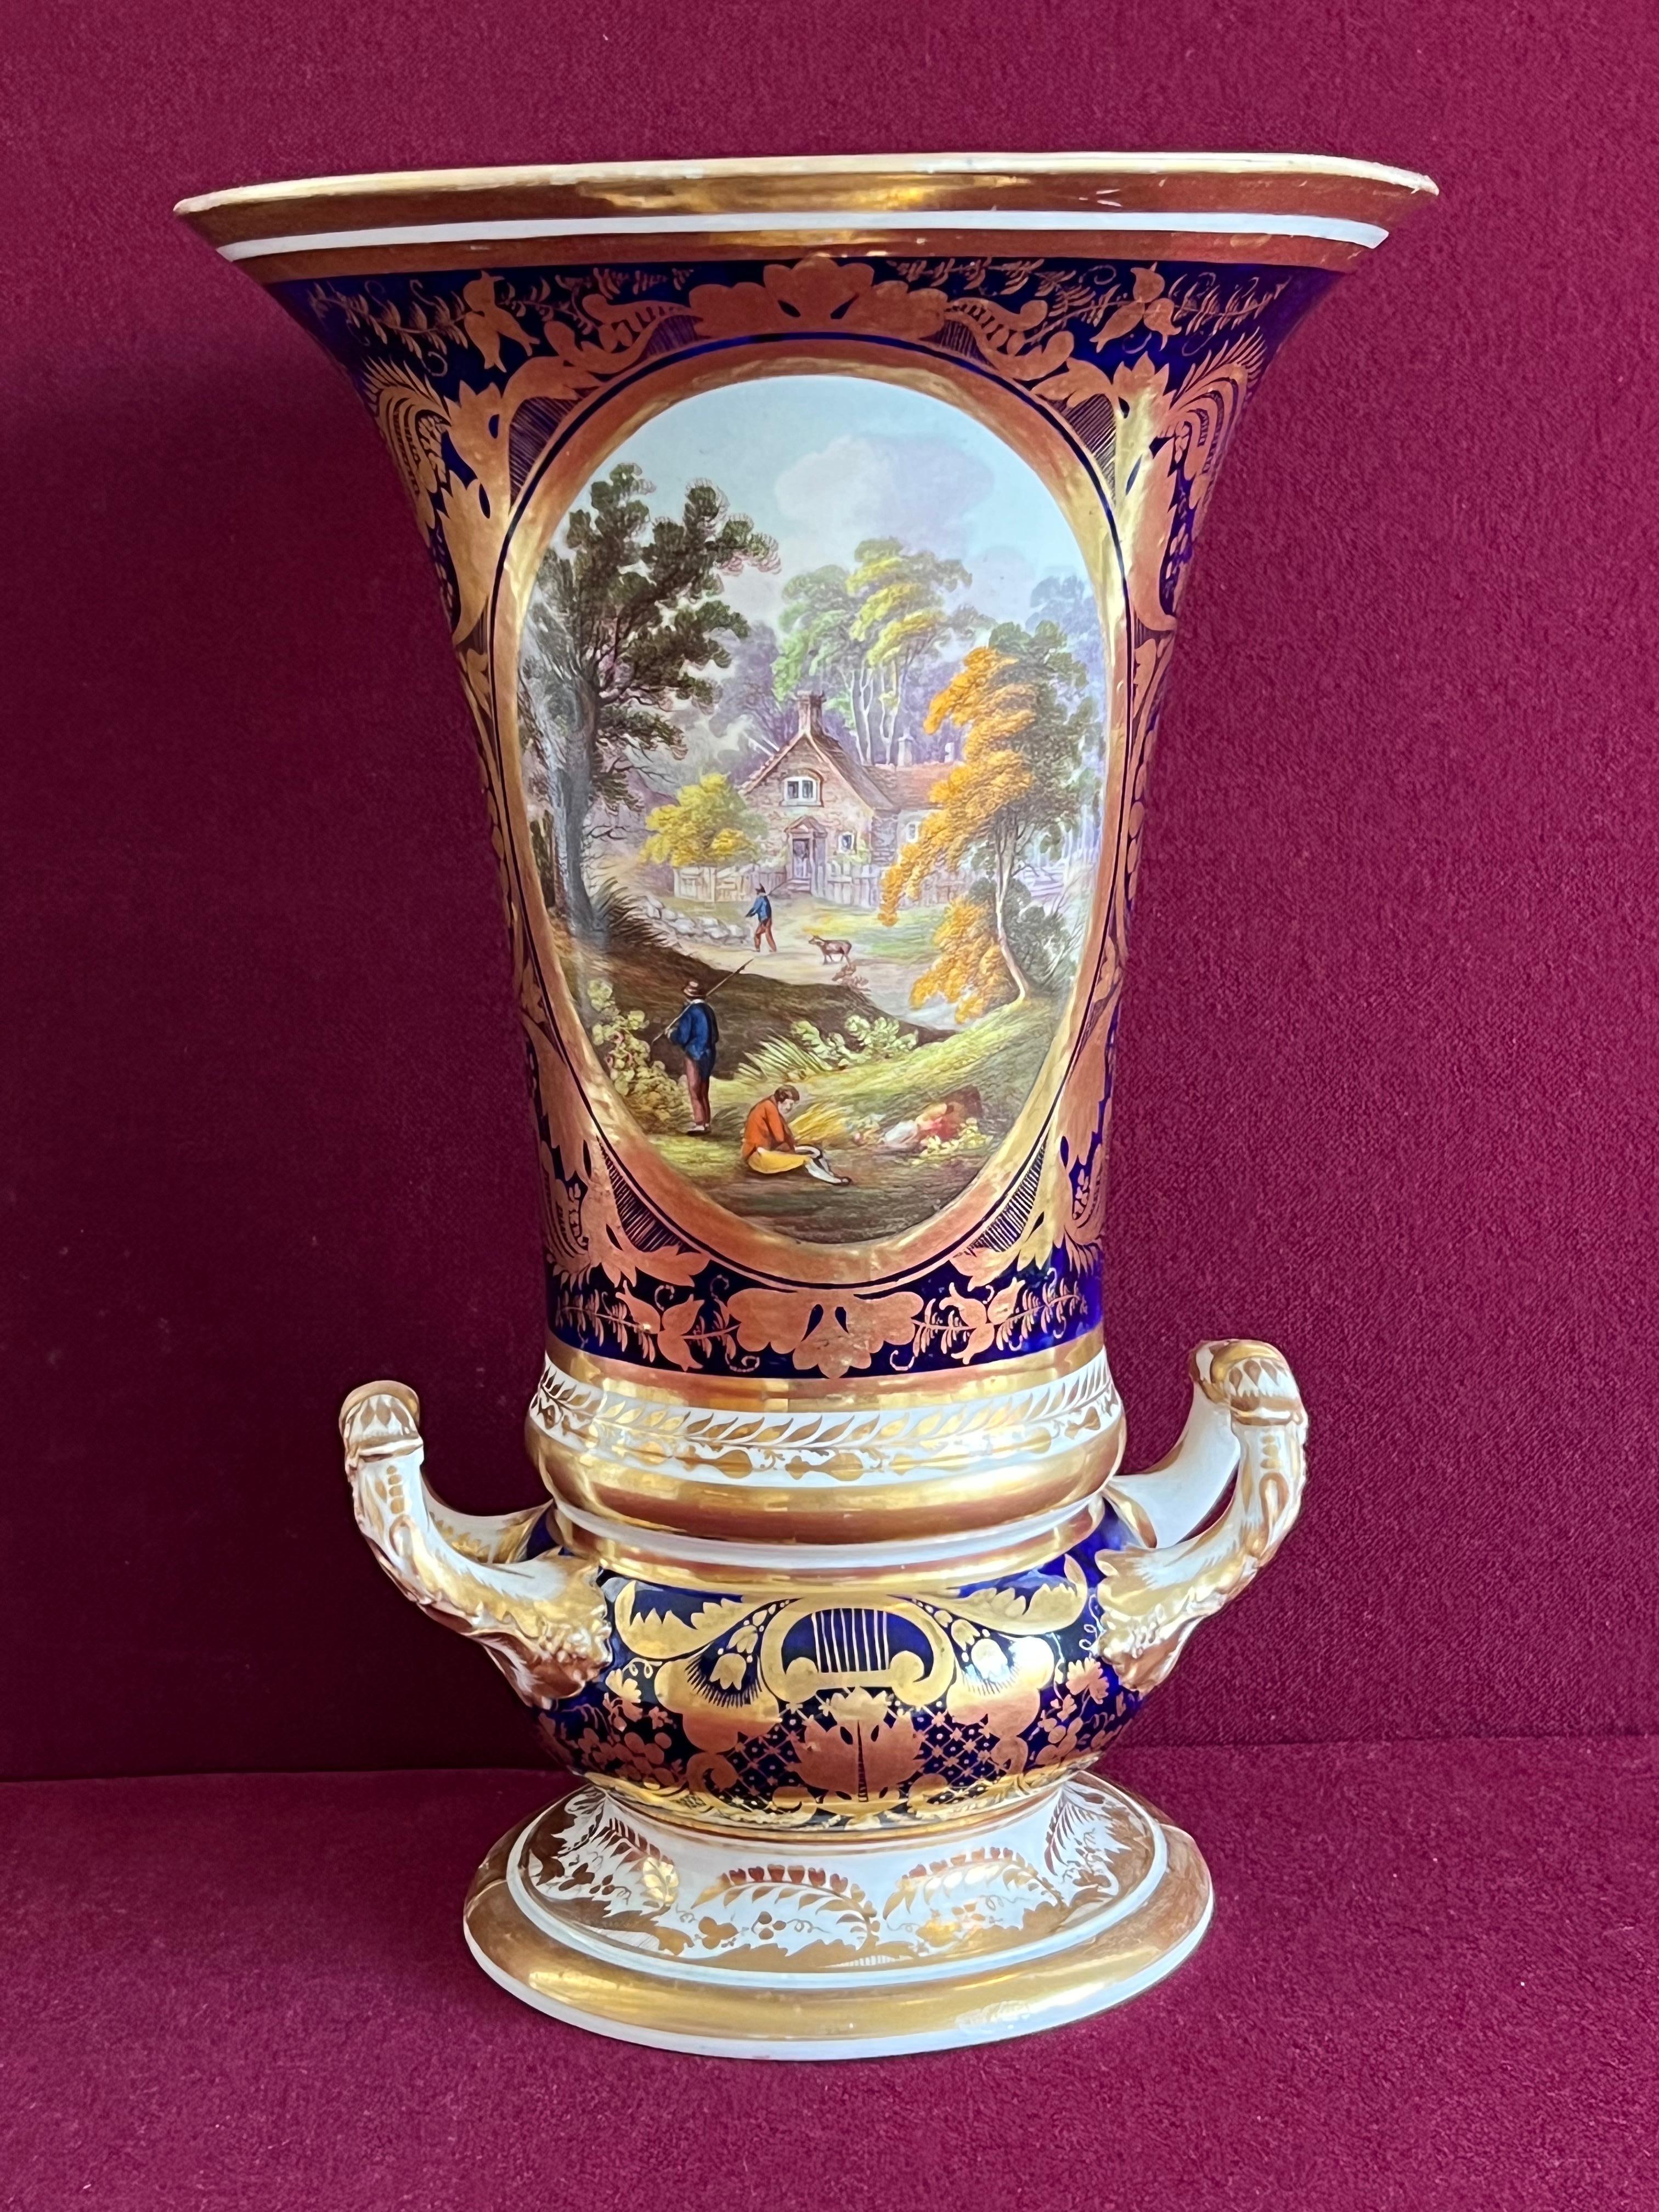 A fine Derby porcelain vase c.1810. Of elongated campana form with two gilded scrolled leaf mount handles and on a spreading circular foot with foliate gilt decoration and gilt band edge. The body is decorated with a large finely painted oval panel